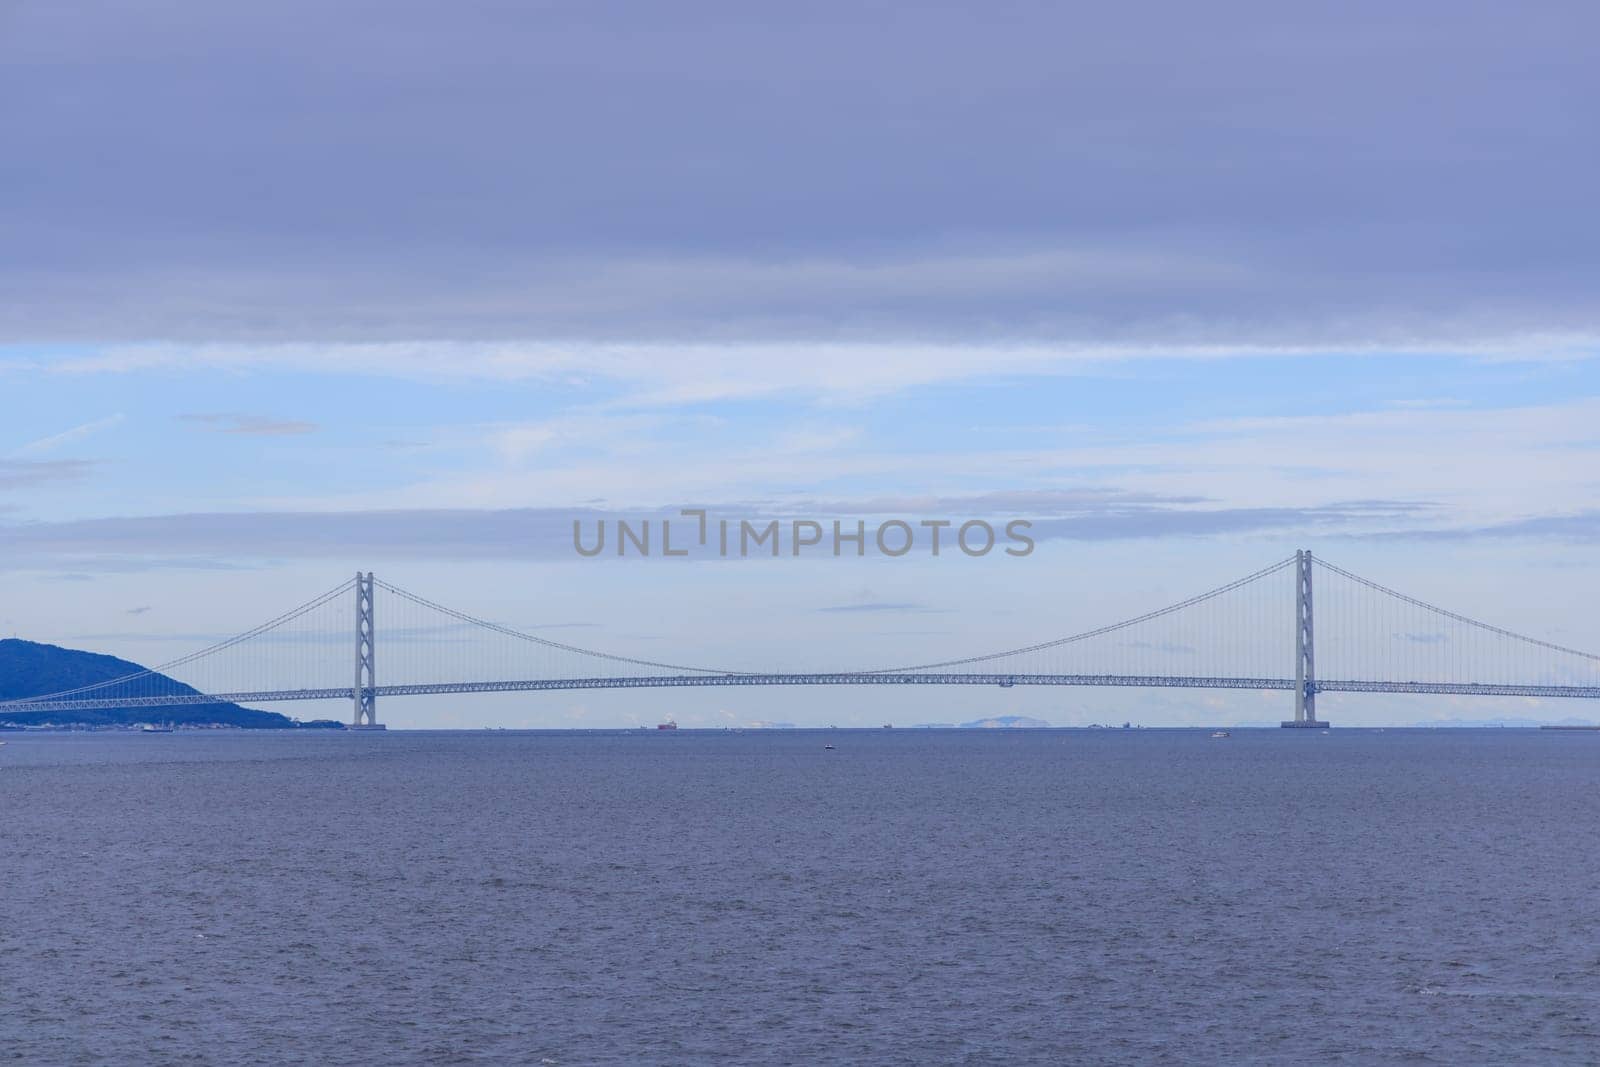 Low cloud layer over Akashi suspension bridge and calm blue water. High quality photo